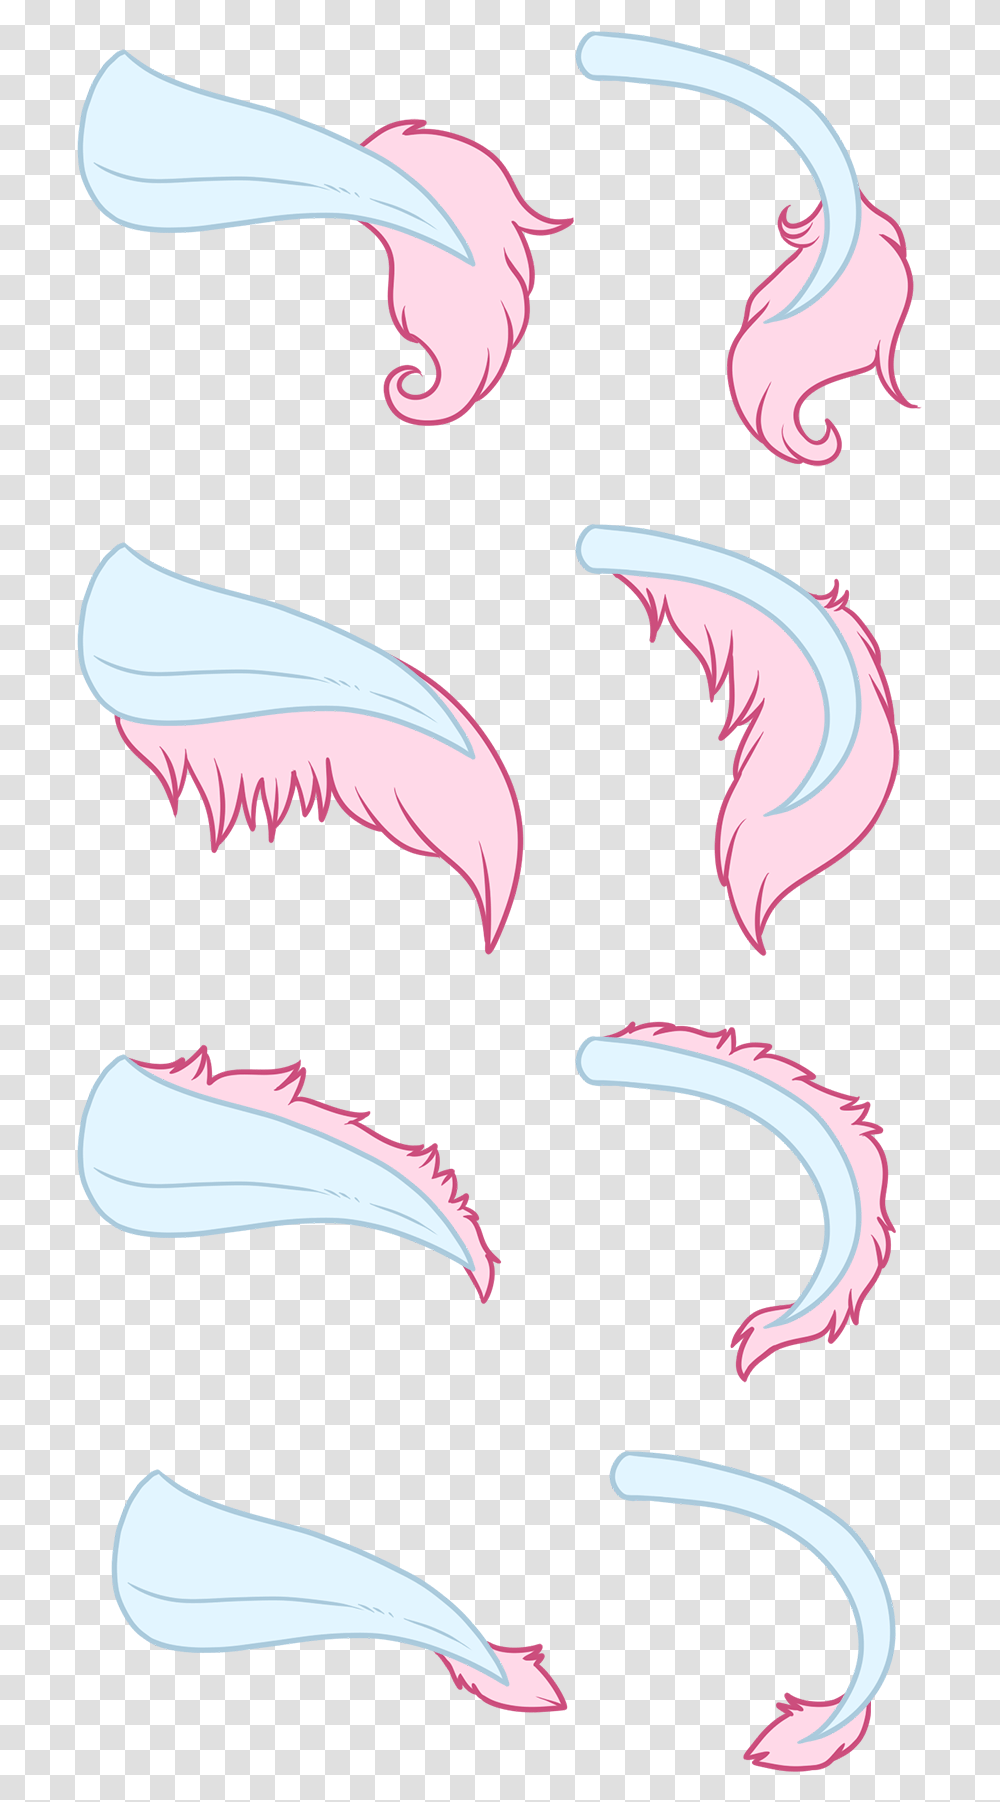 Troll Anatomy On The Rp Repository, Interior Design, Teeth Transparent Png